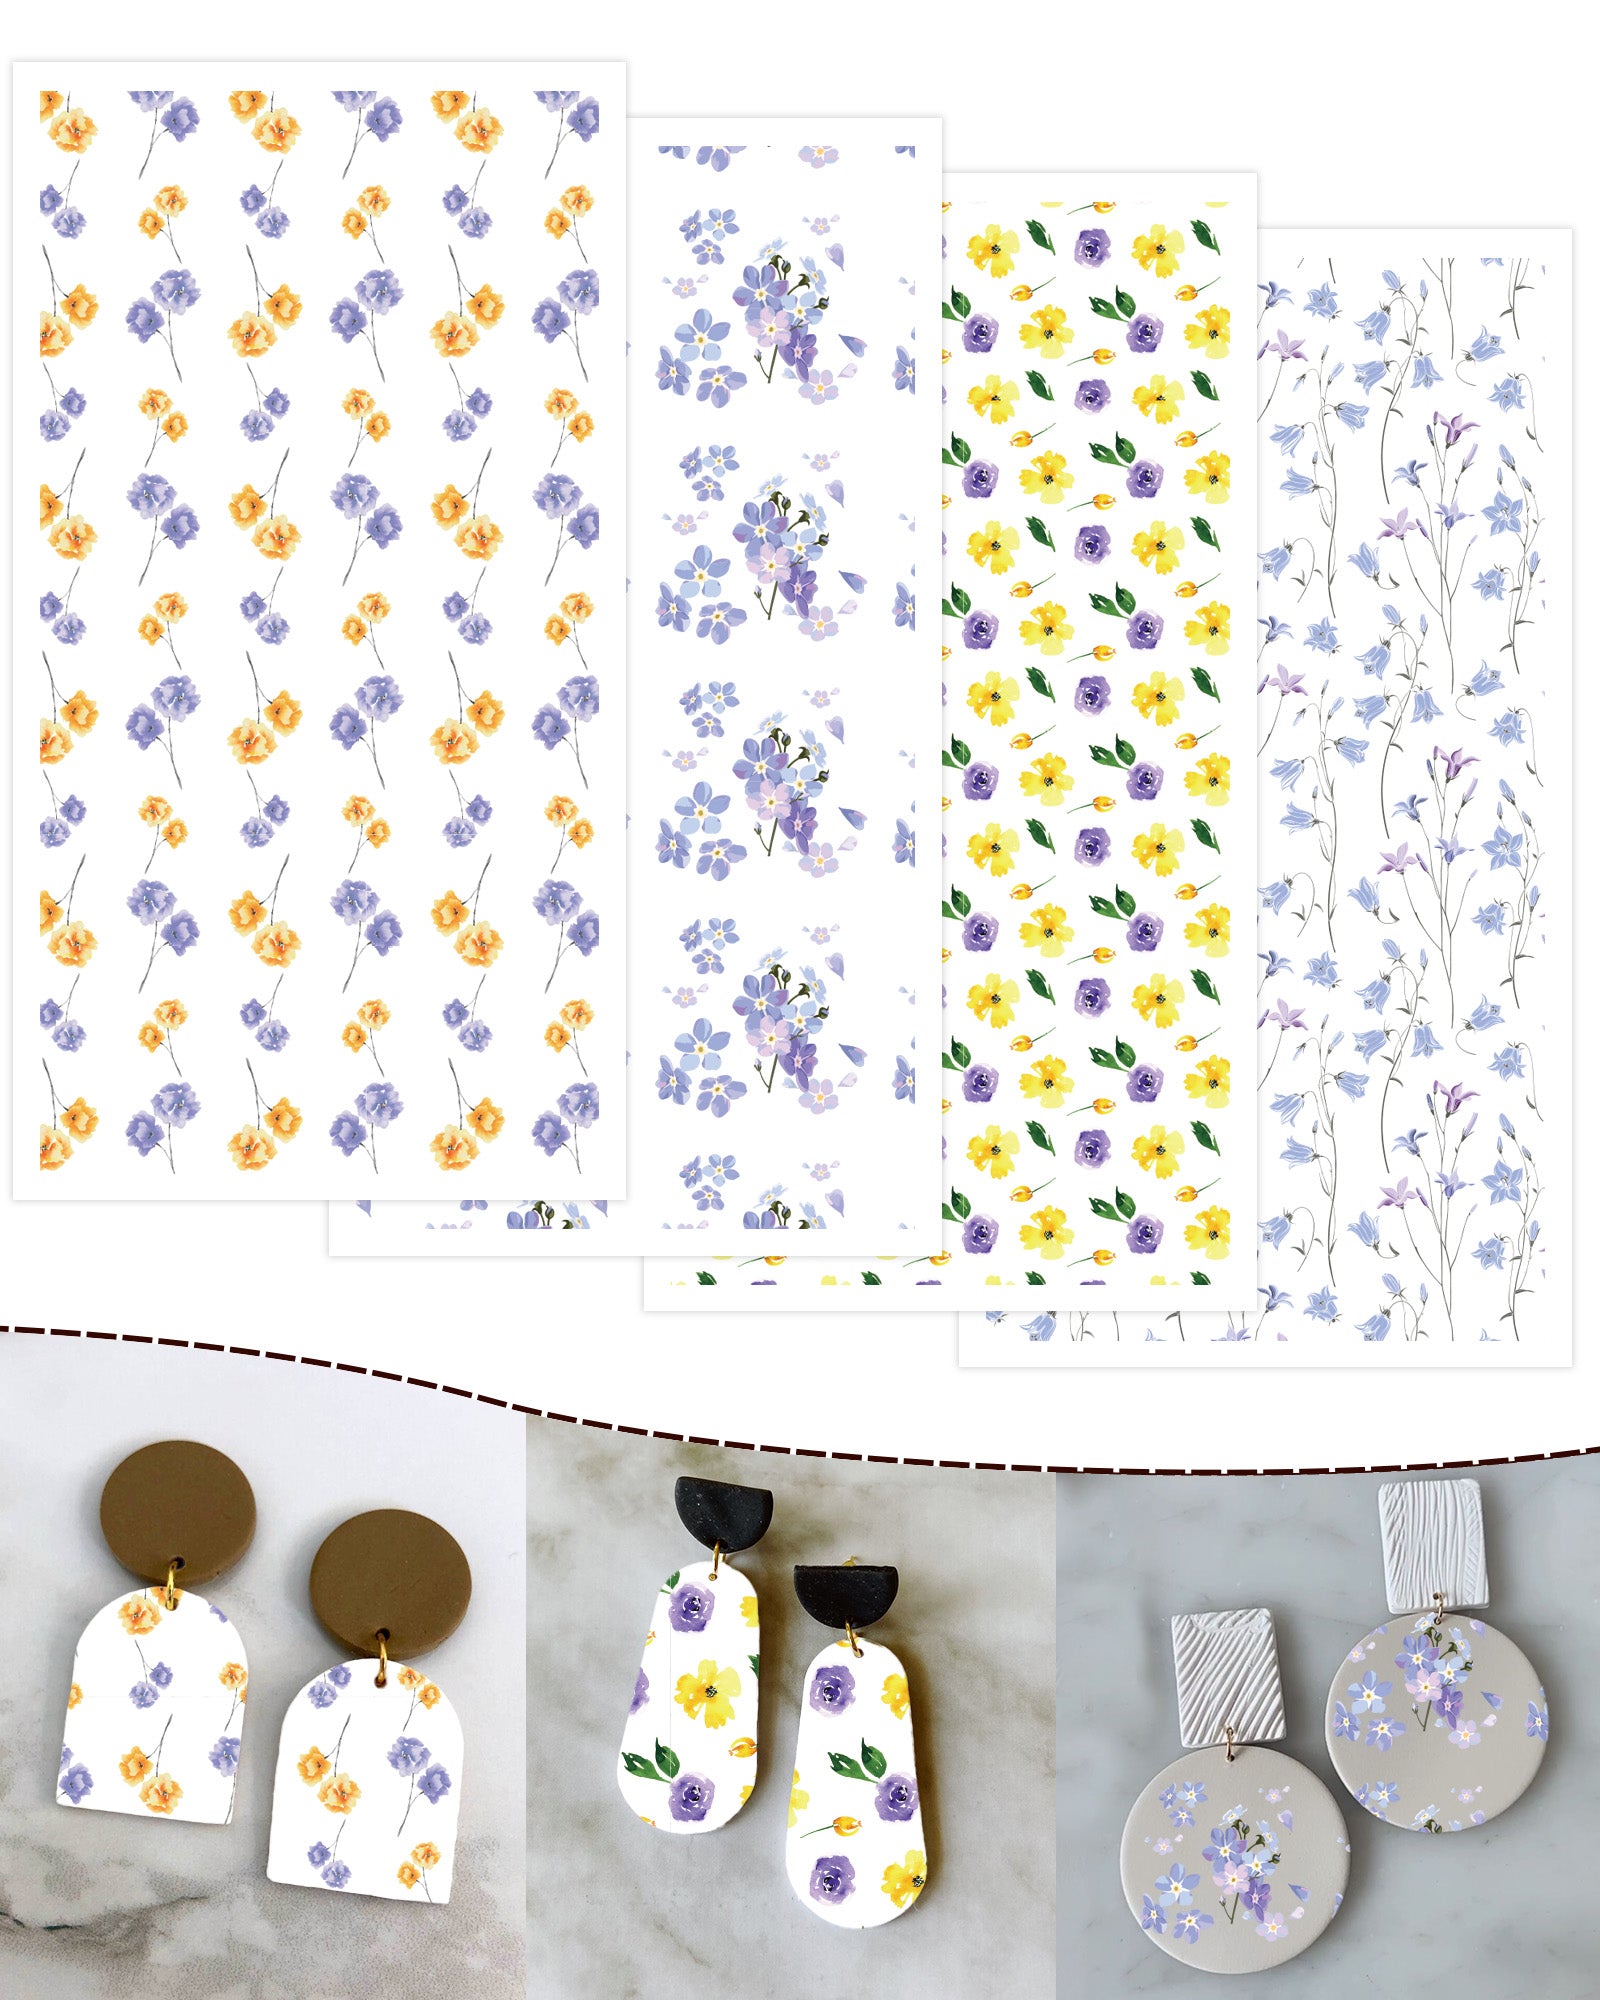 Puocaon Floral Polymer Clay Transfer Paper 20 Pcs